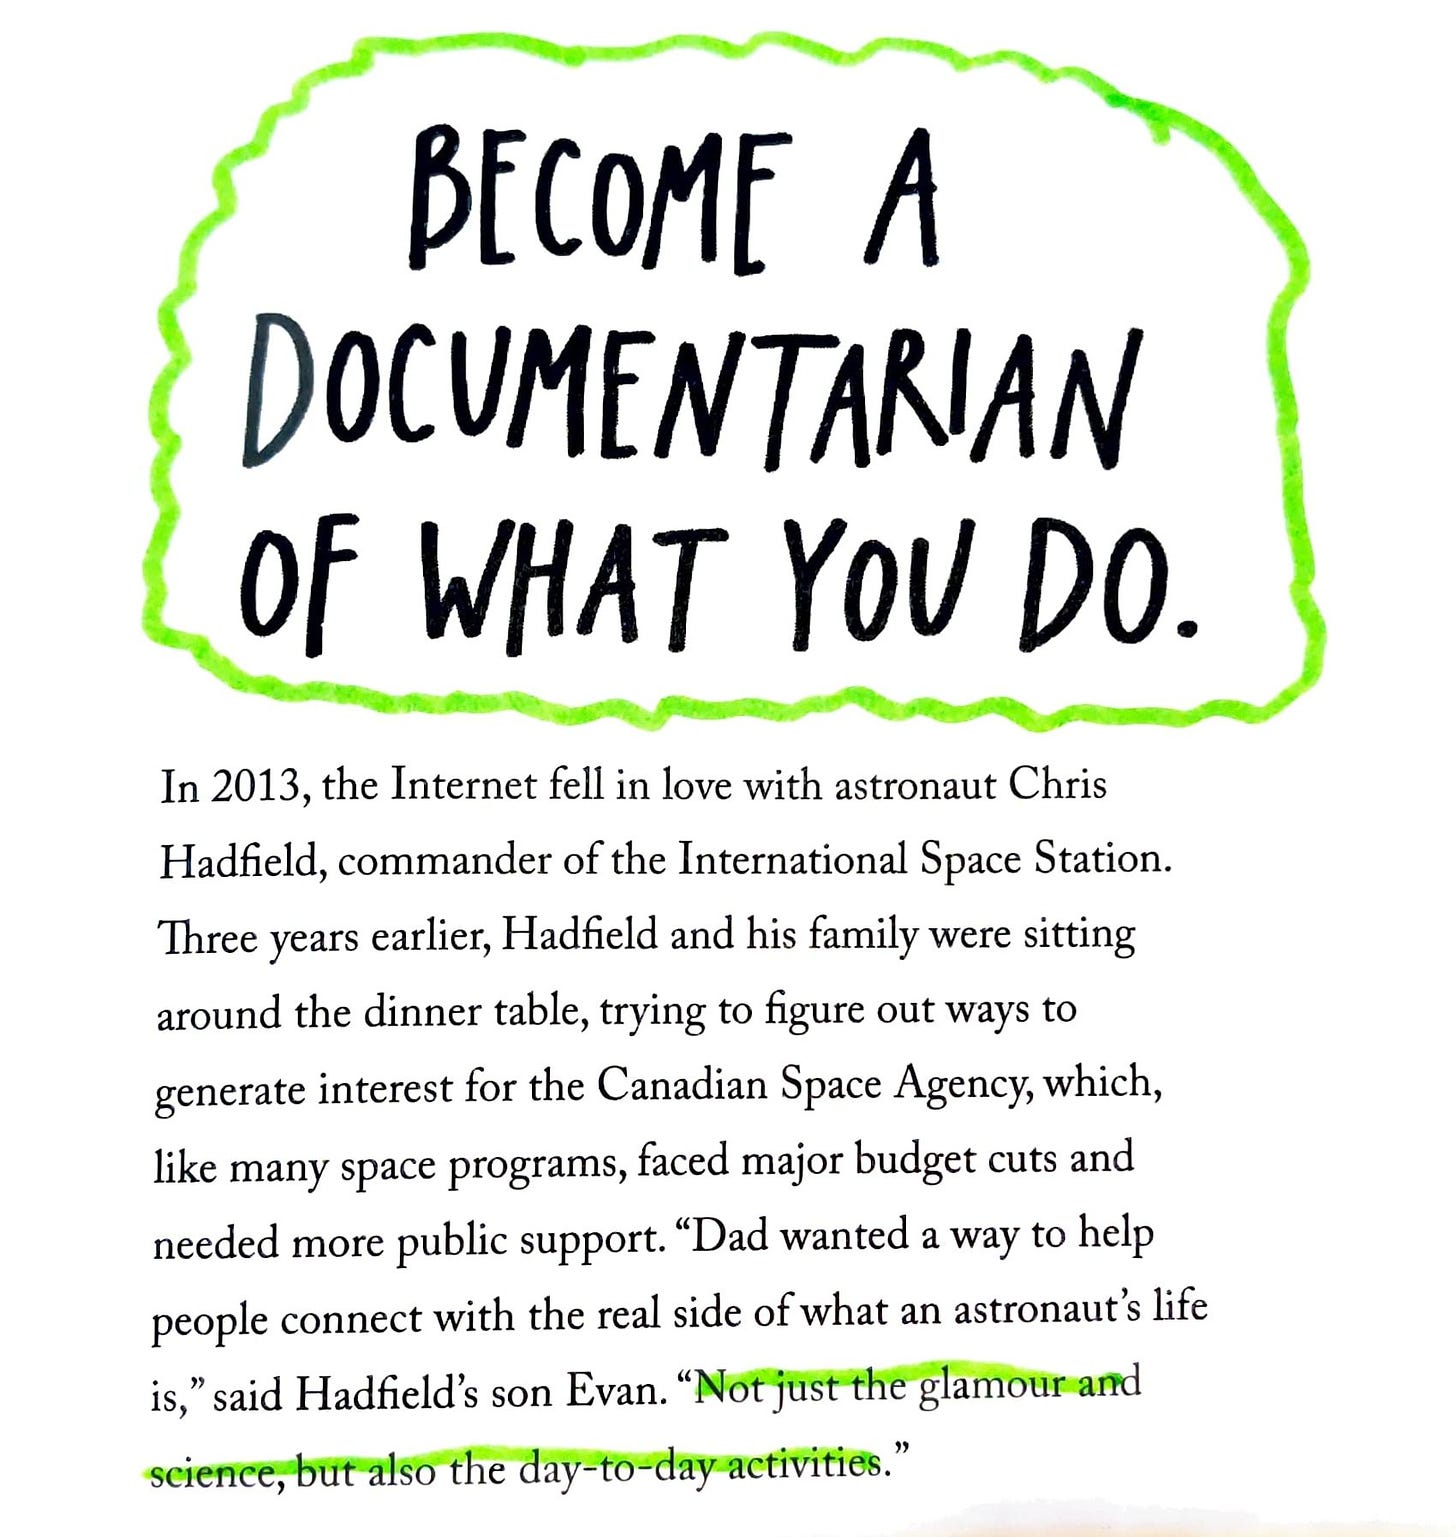 Become Documentarian - Show Your Work by Austin Kleon